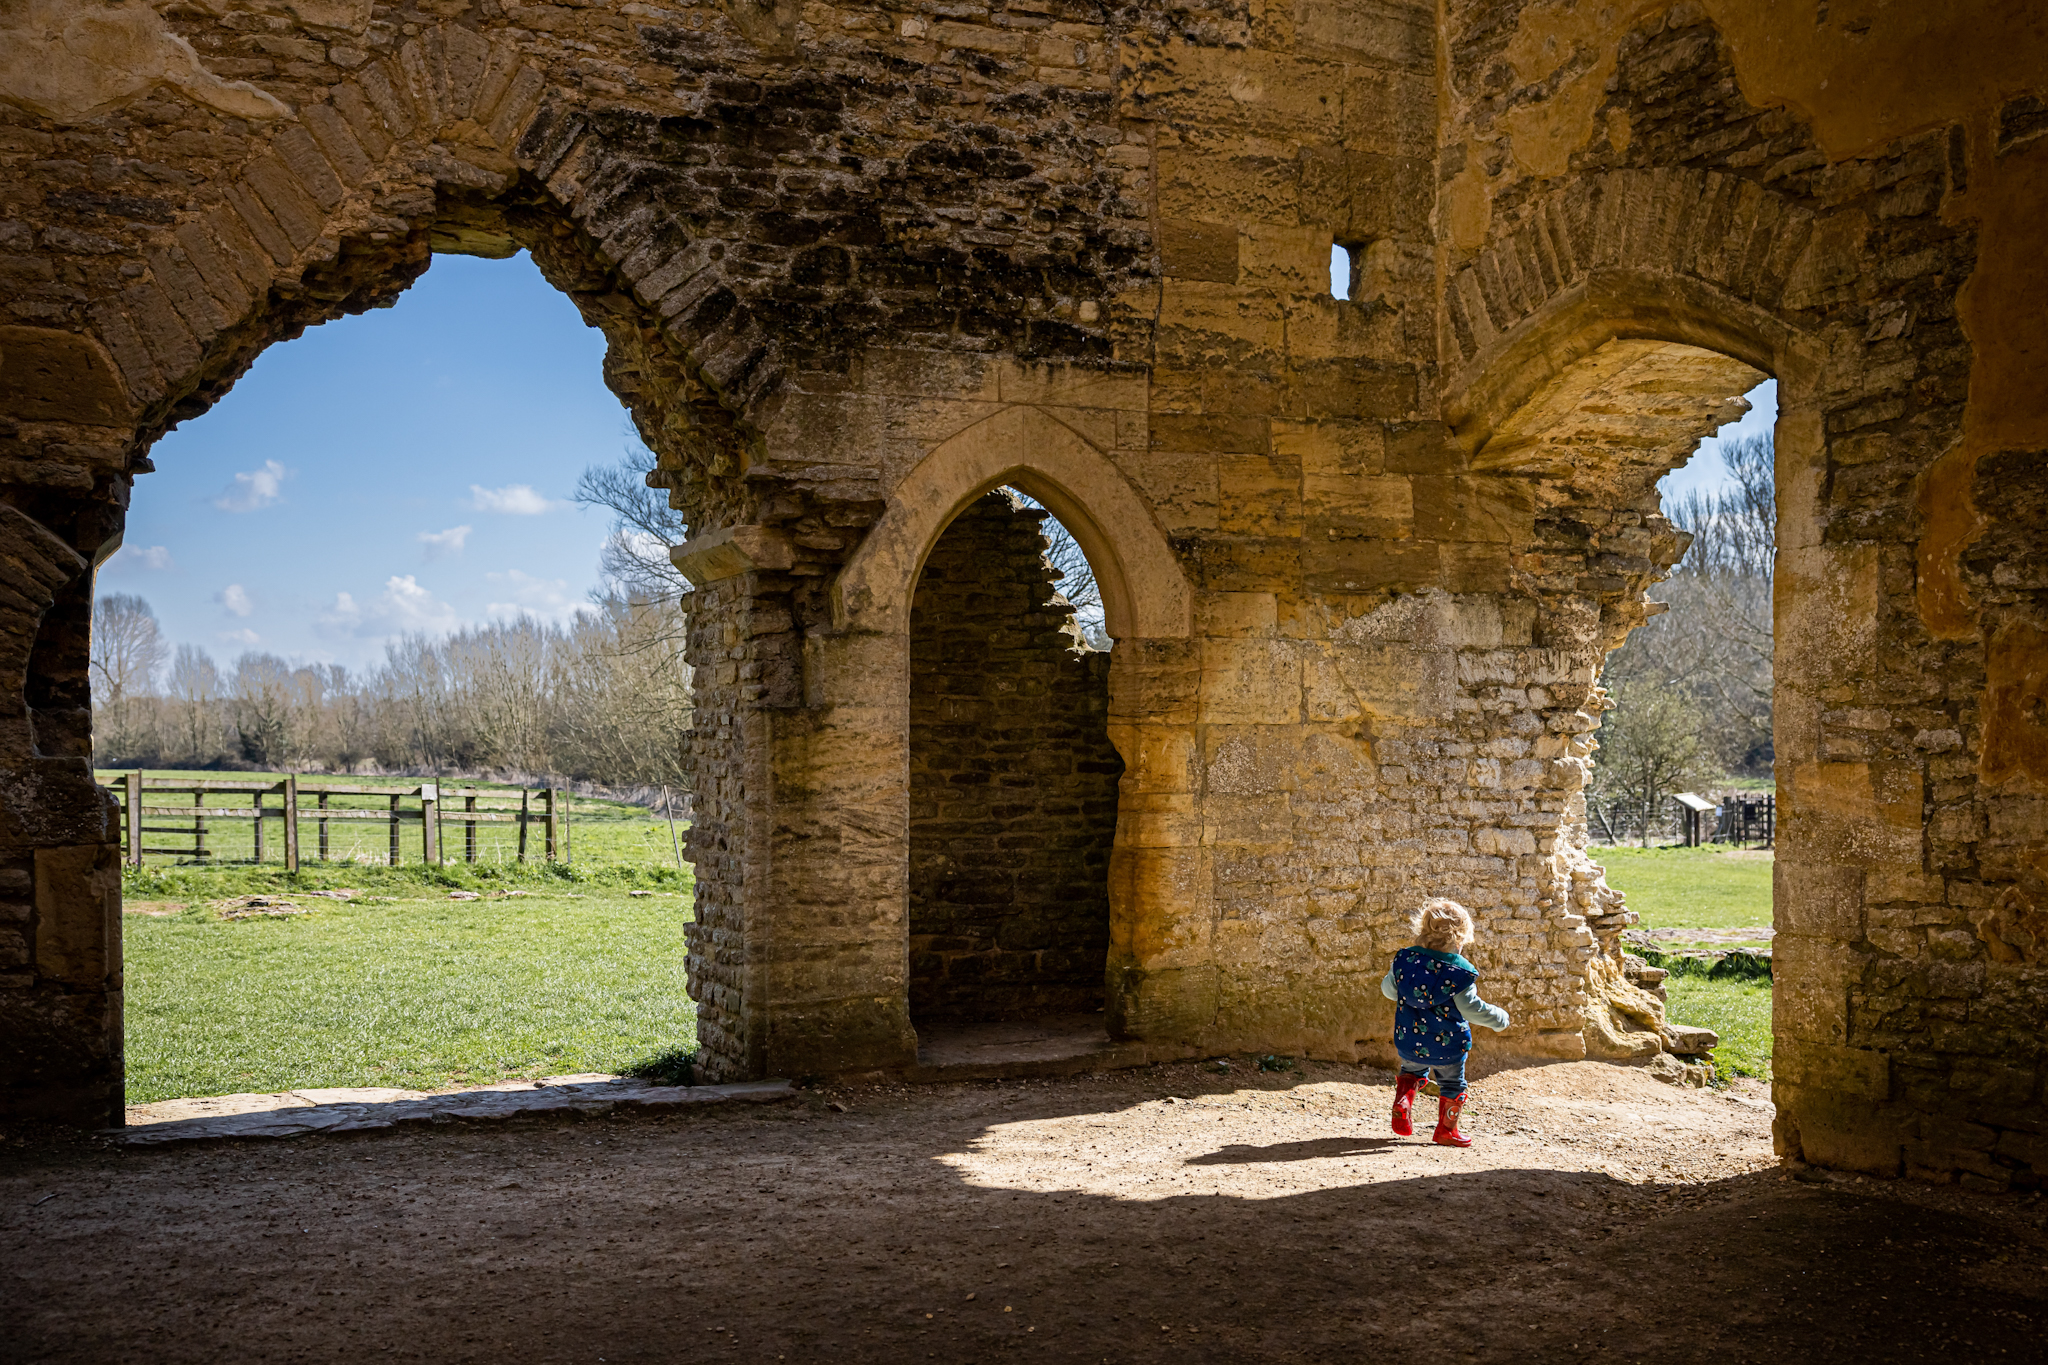 Environmental Portraiture - Child in old building ruins